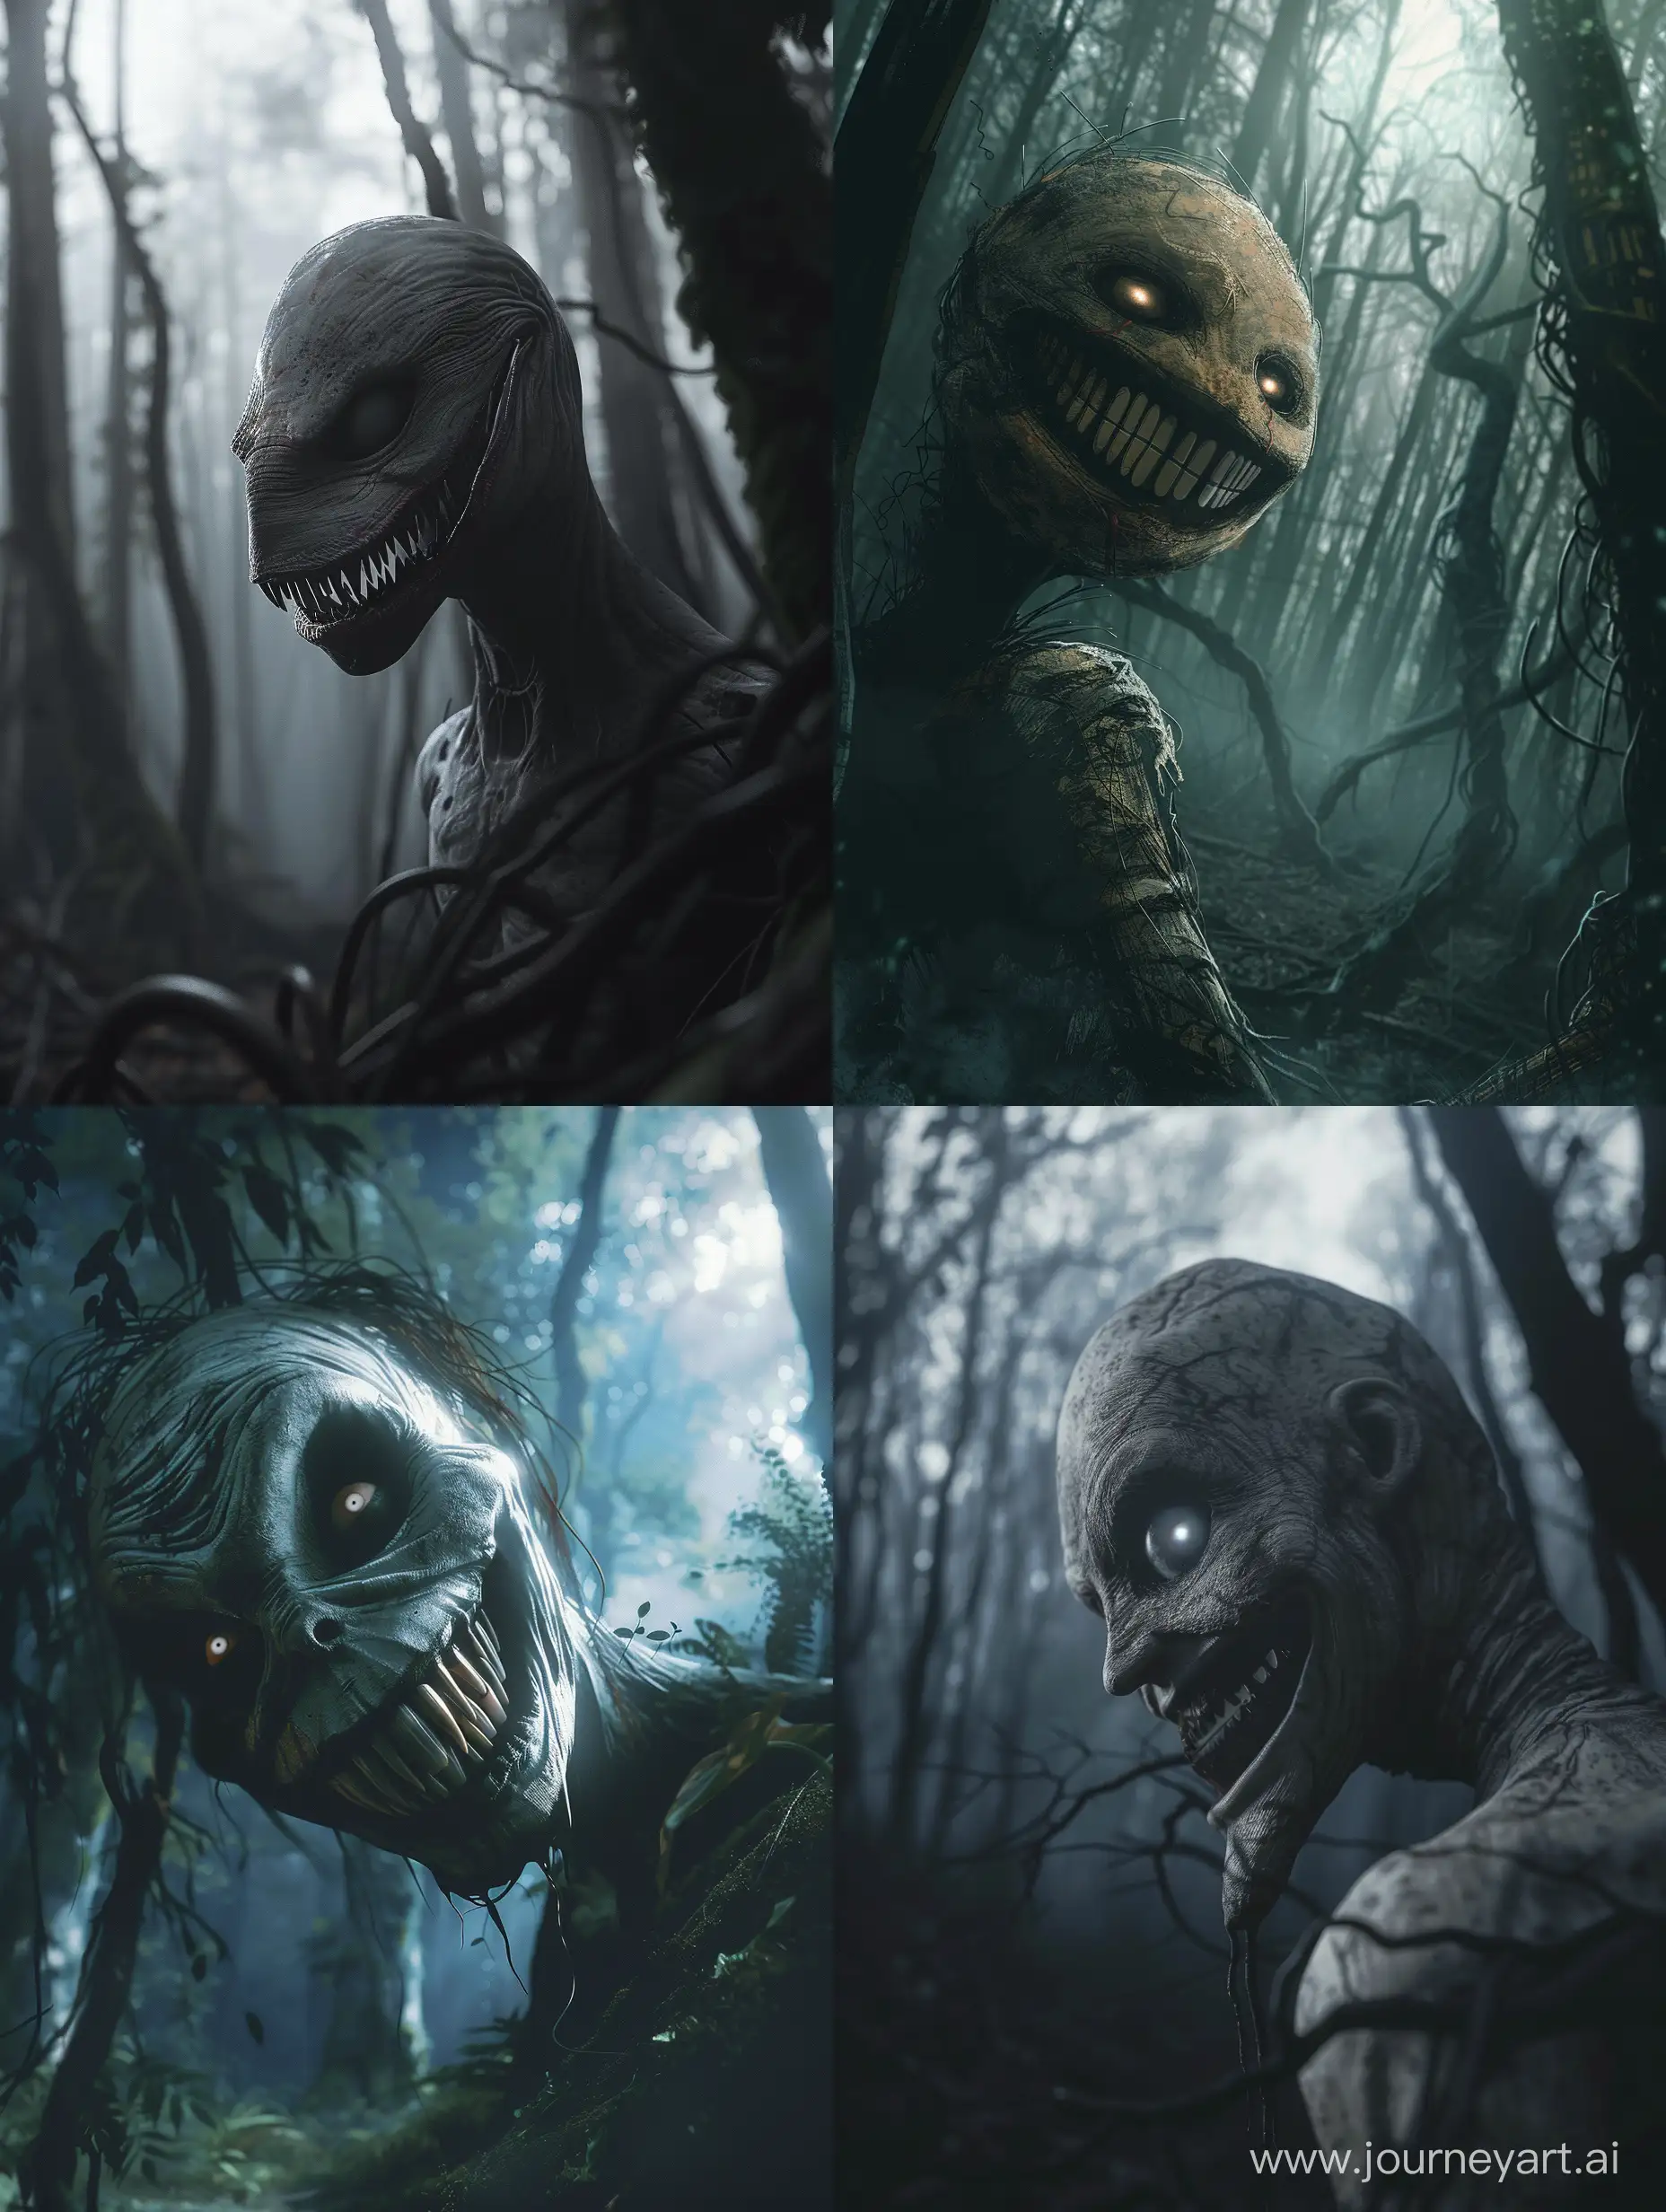 Sinister-Smiling-Creature-in-Enigmatic-Forest-Videogame-Concept-Art